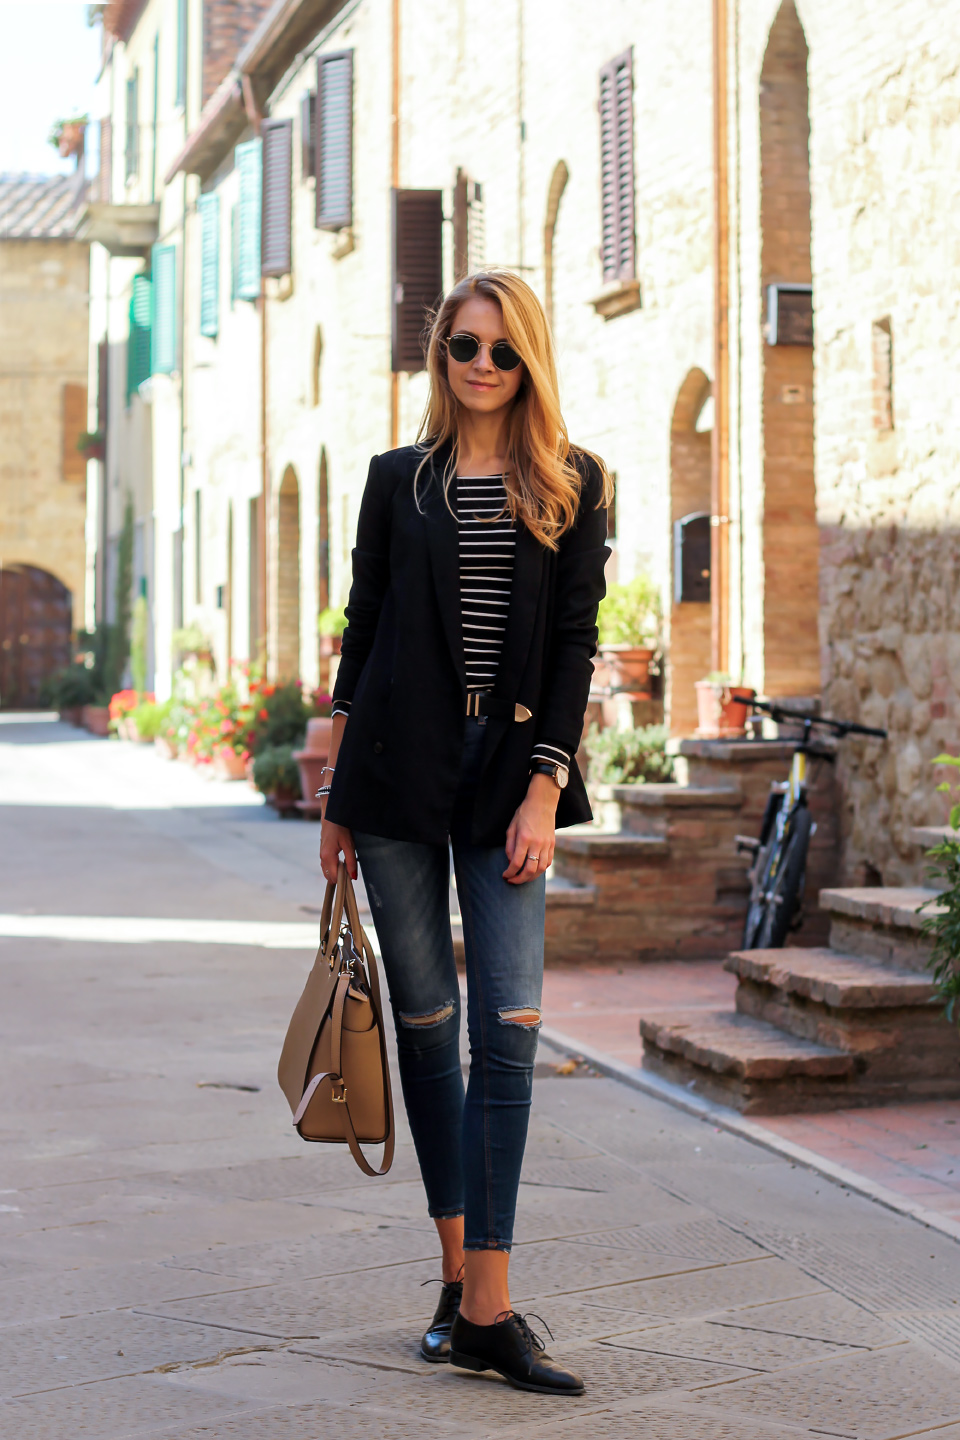 black blazer, striped top, distressed jeans, casual outfit